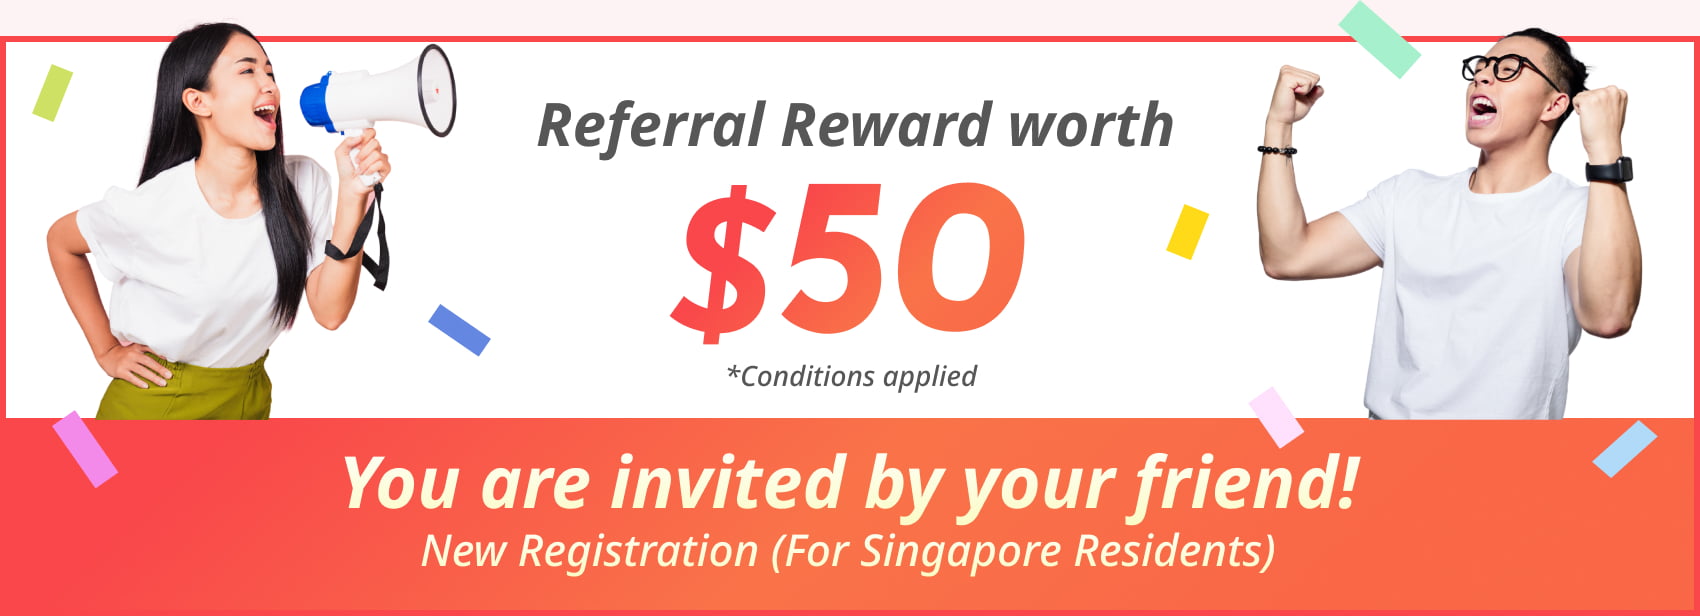 Referral Reward worth $50 *Conditions applied You are invited by your friend! New Registration(For Singapore Residents)